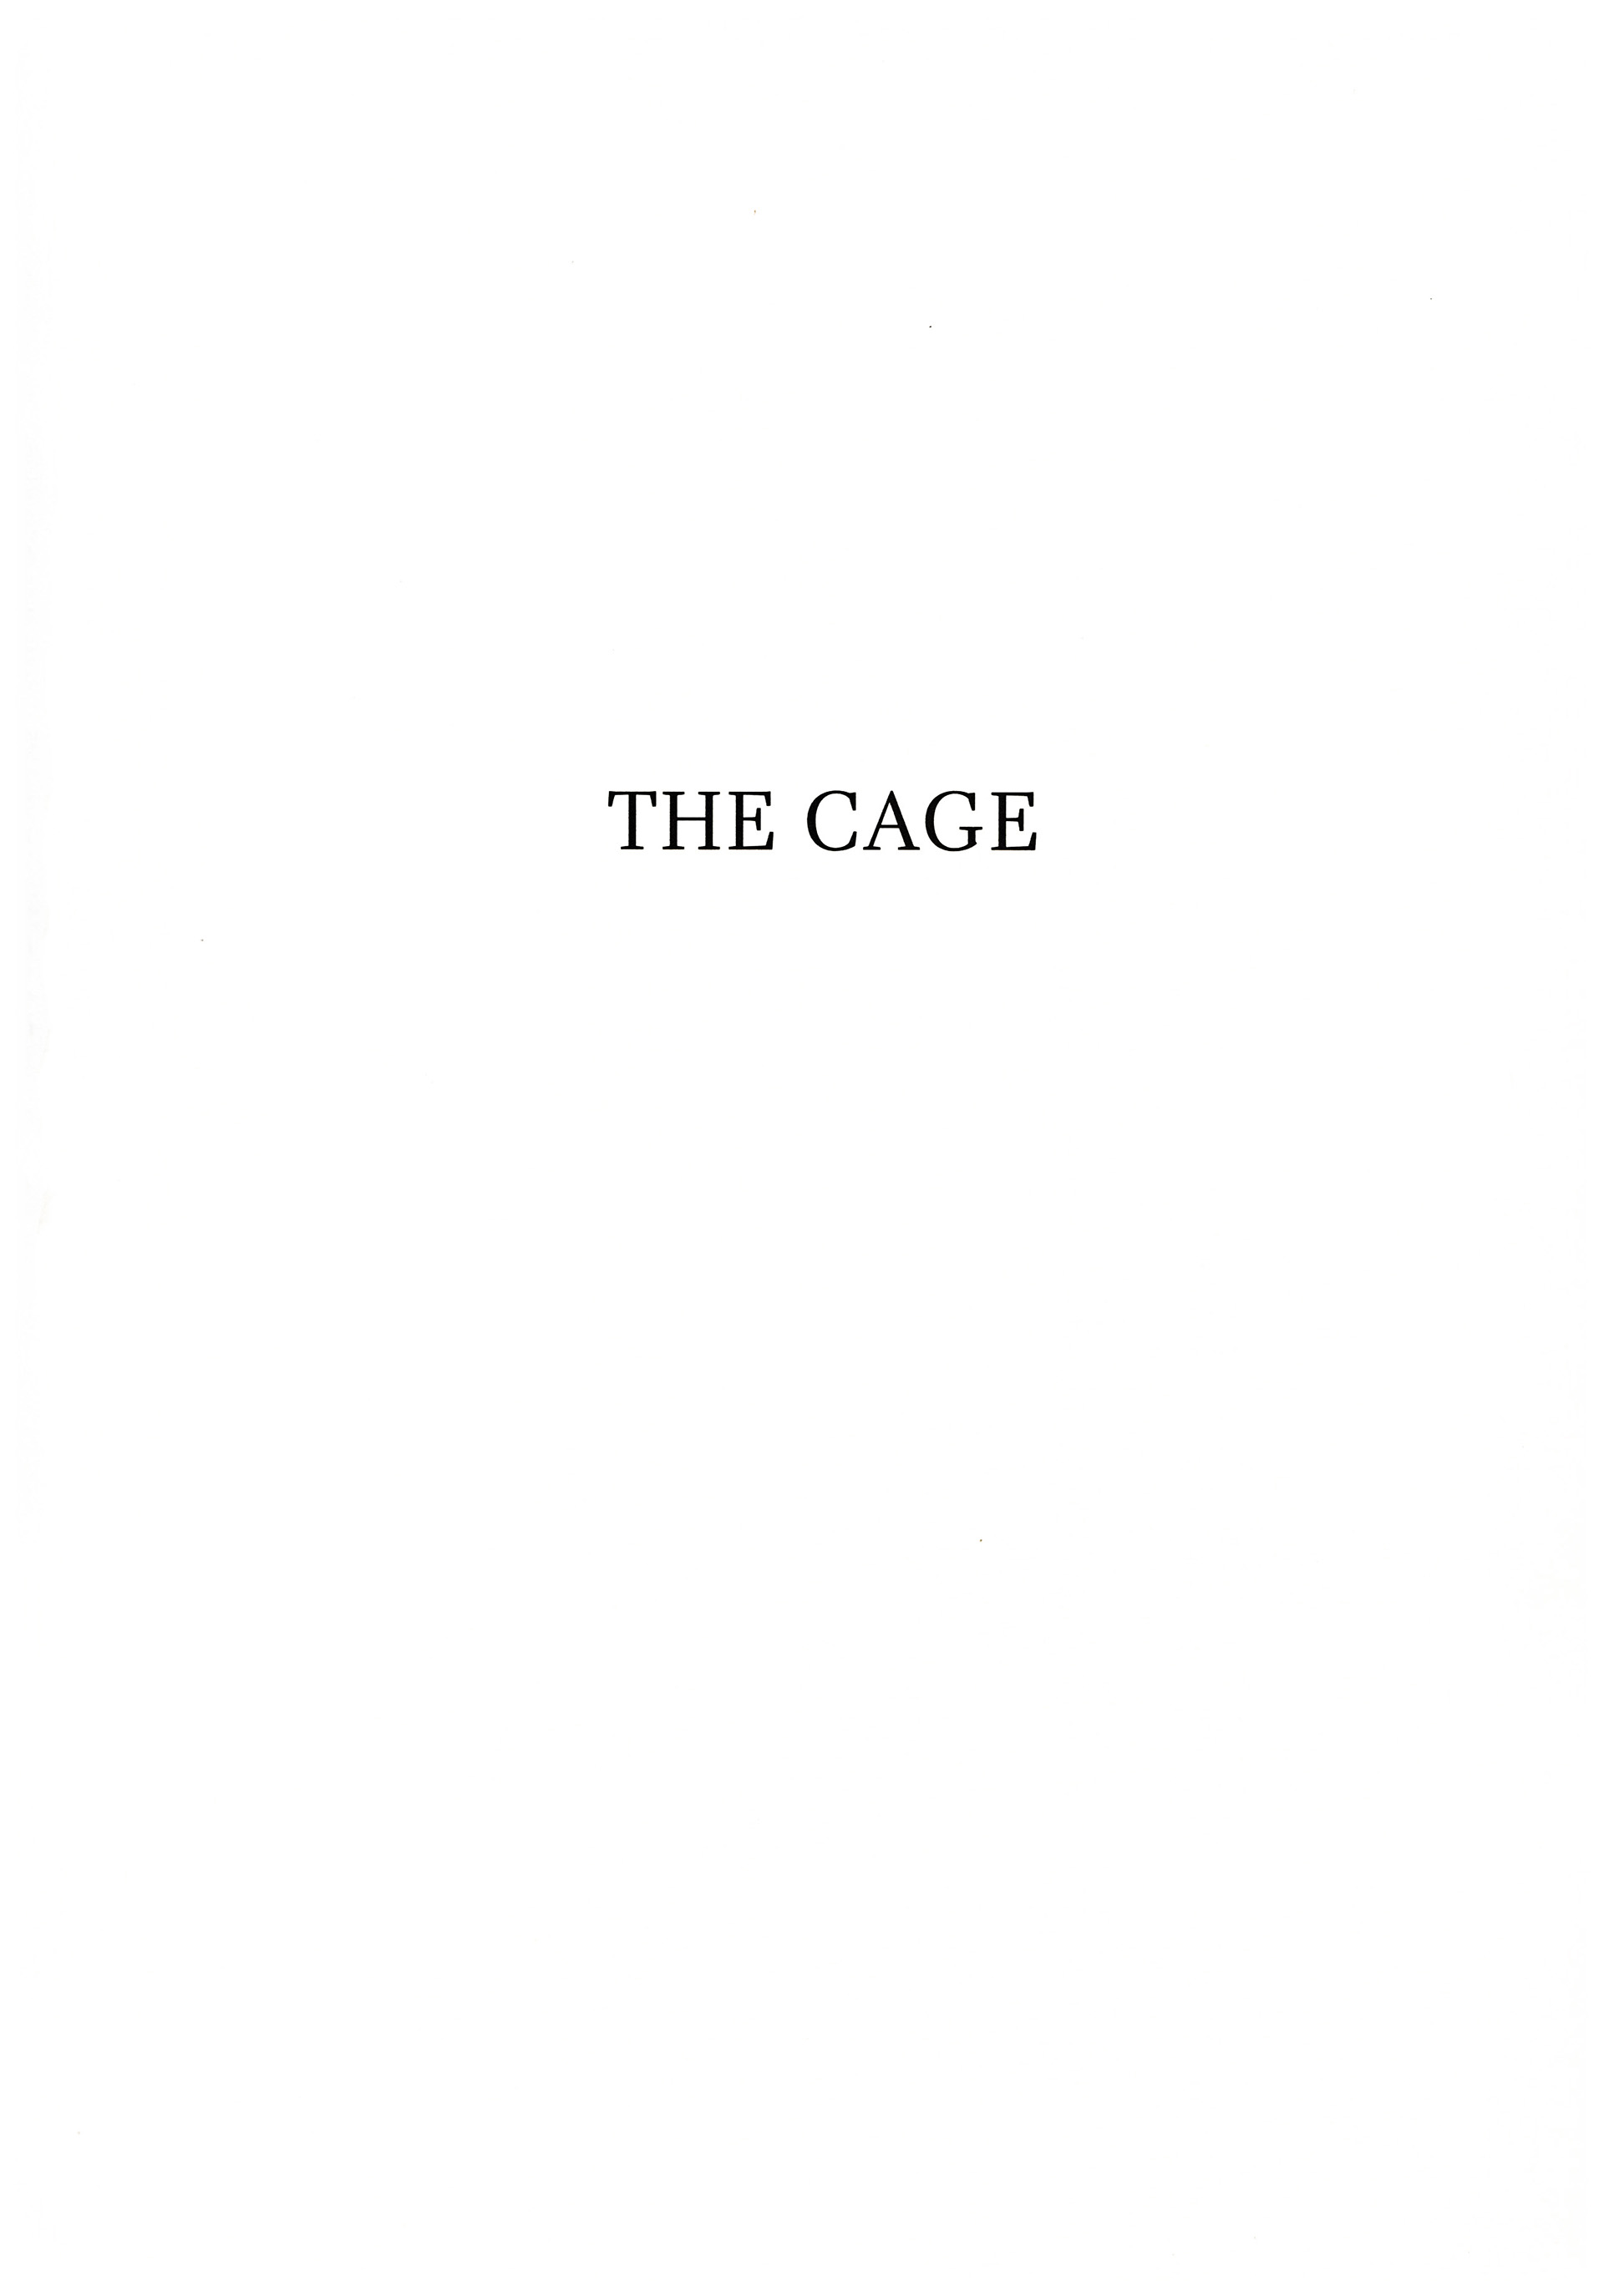 Read online The Cage comic -  Issue # TPB (Part 1) - 3